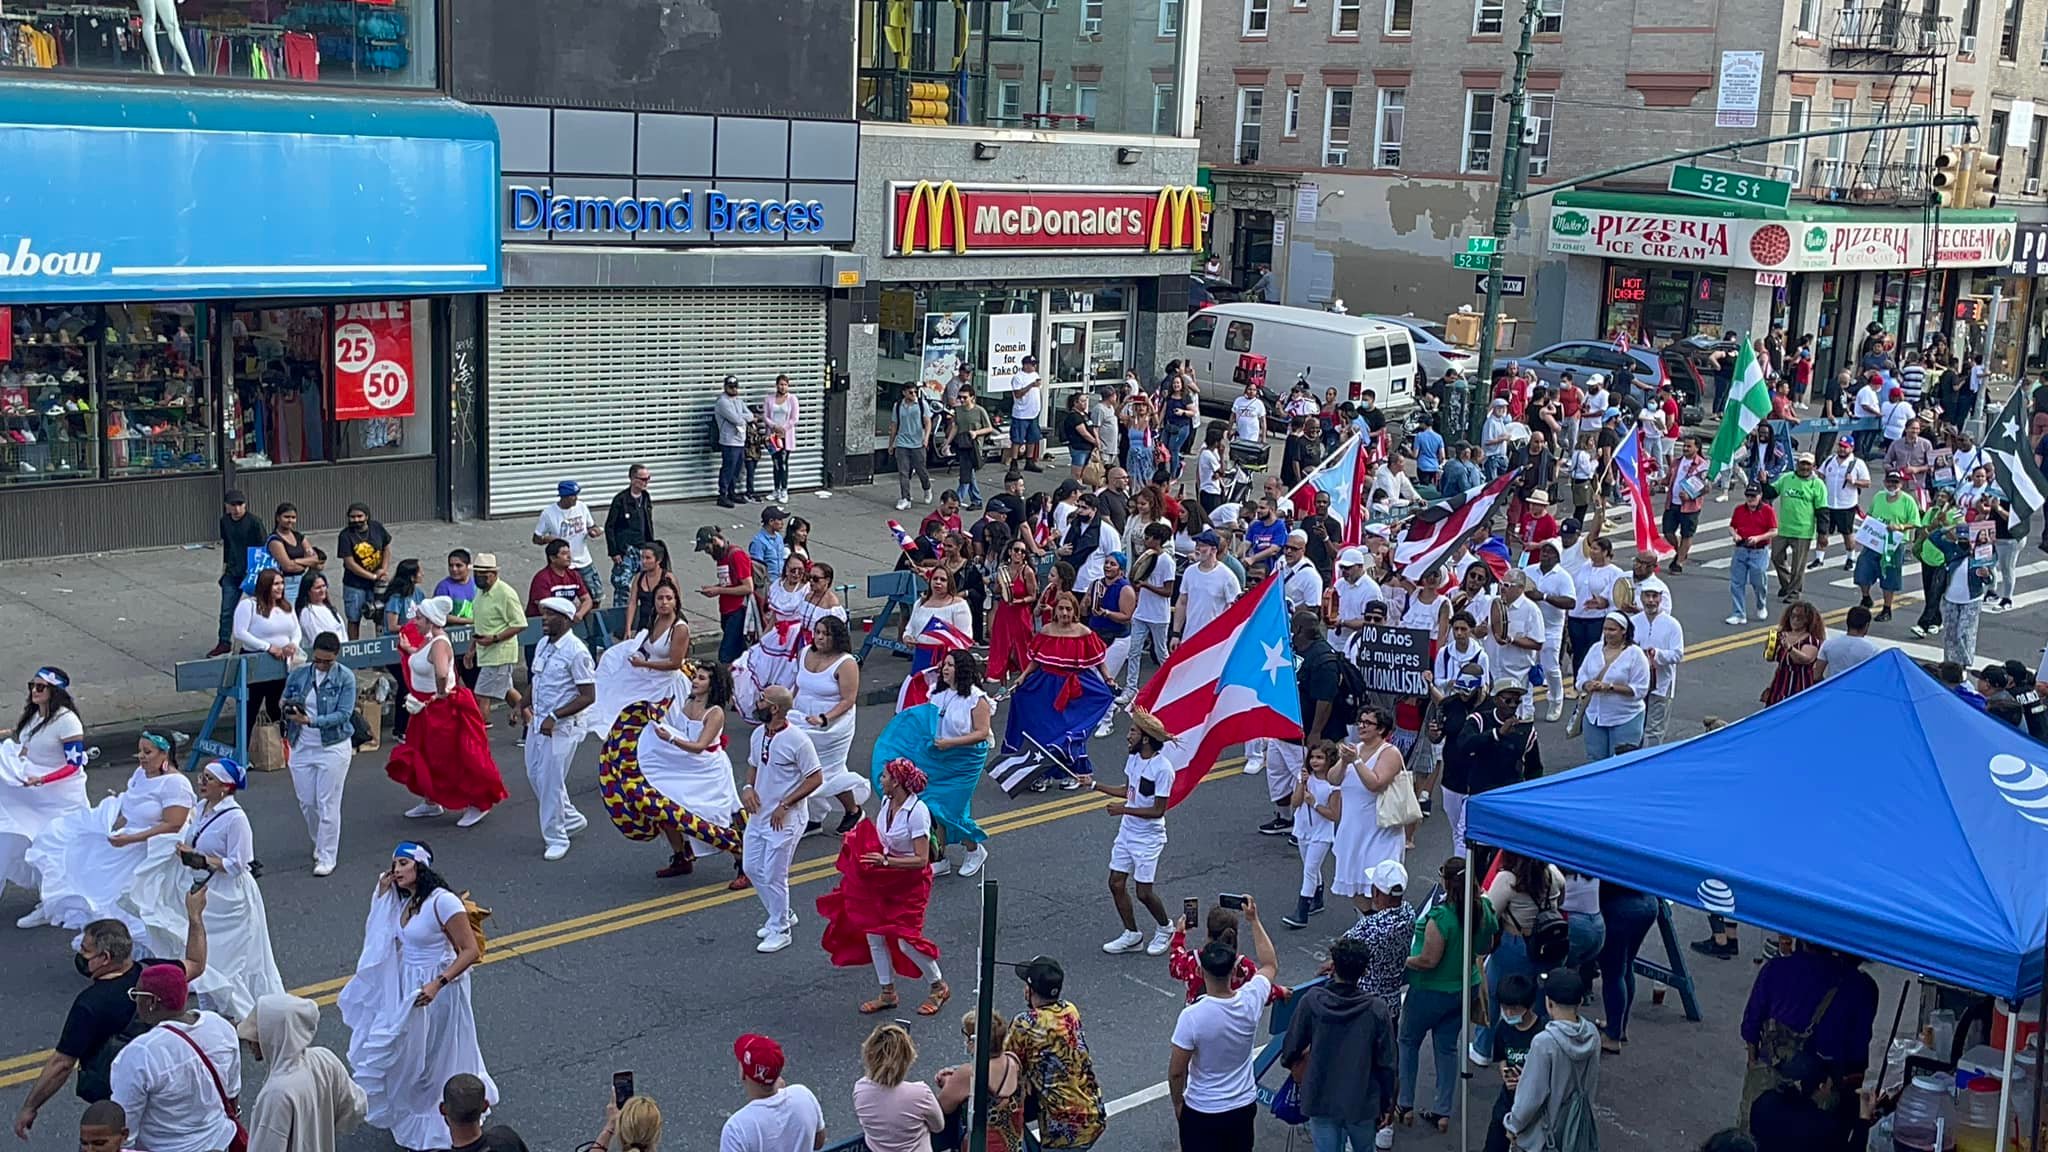 A vibrant street parade with people dressed in traditional and casual attire, waving puerto rican flags, dancing and marching down a city street lined with shops and fast food outlets.